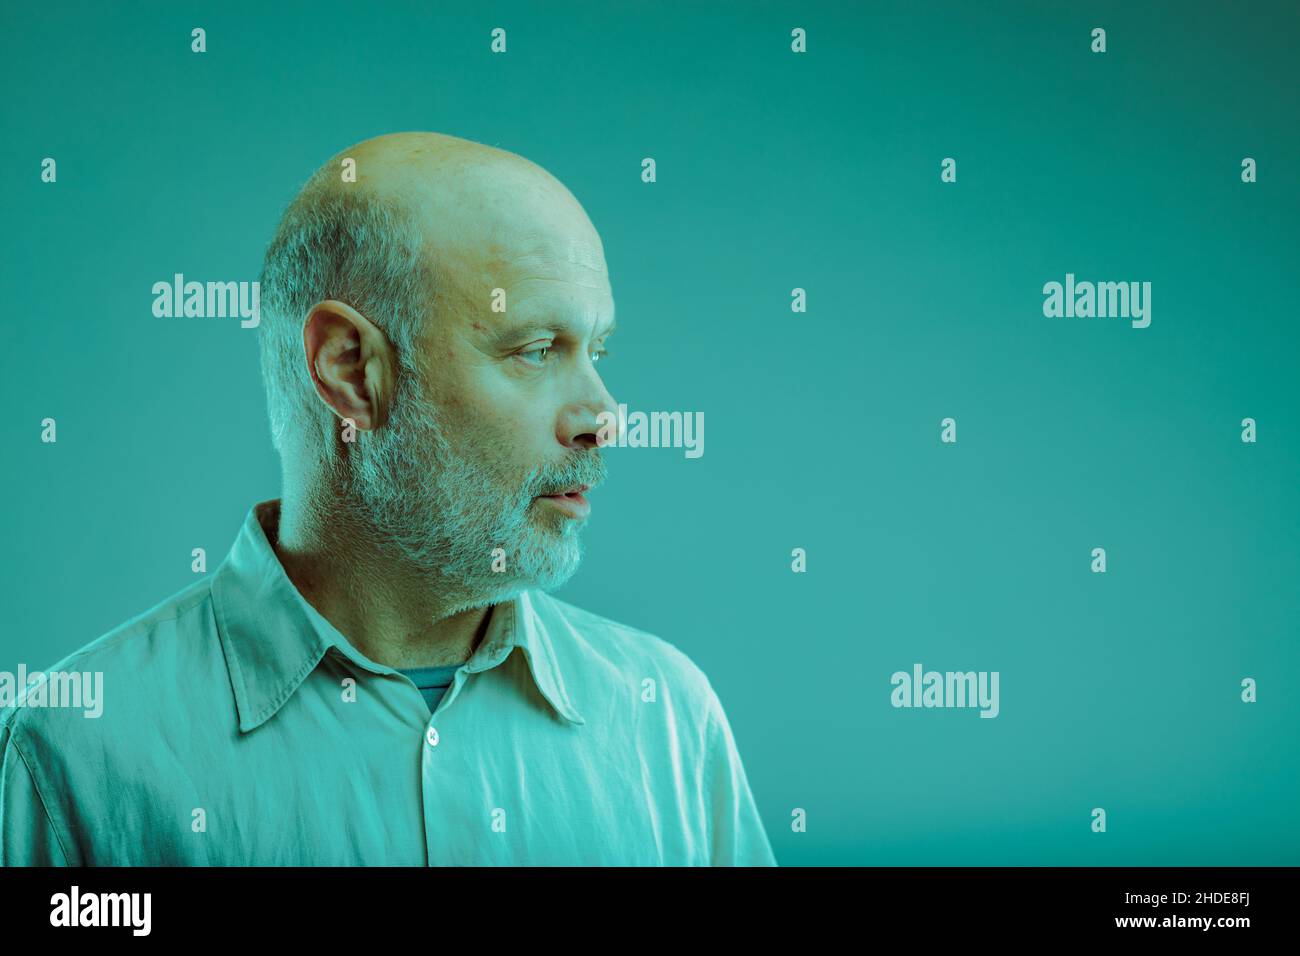 Thoughtful balding senior man with beard looking aside towards blank copyspace on a blue color toning Stock Photo